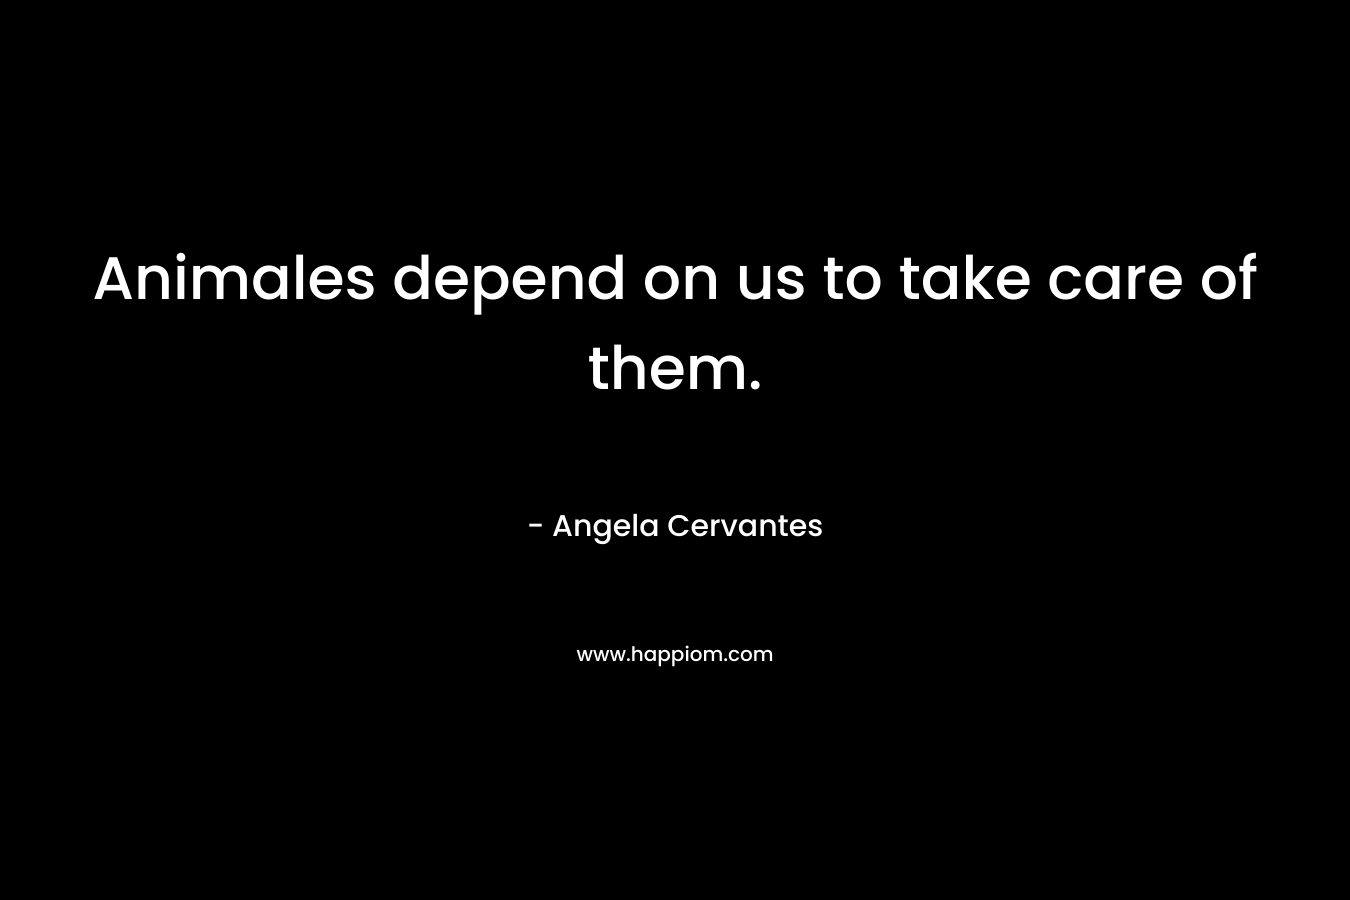 Animales depend on us to take care of them. – Angela Cervantes